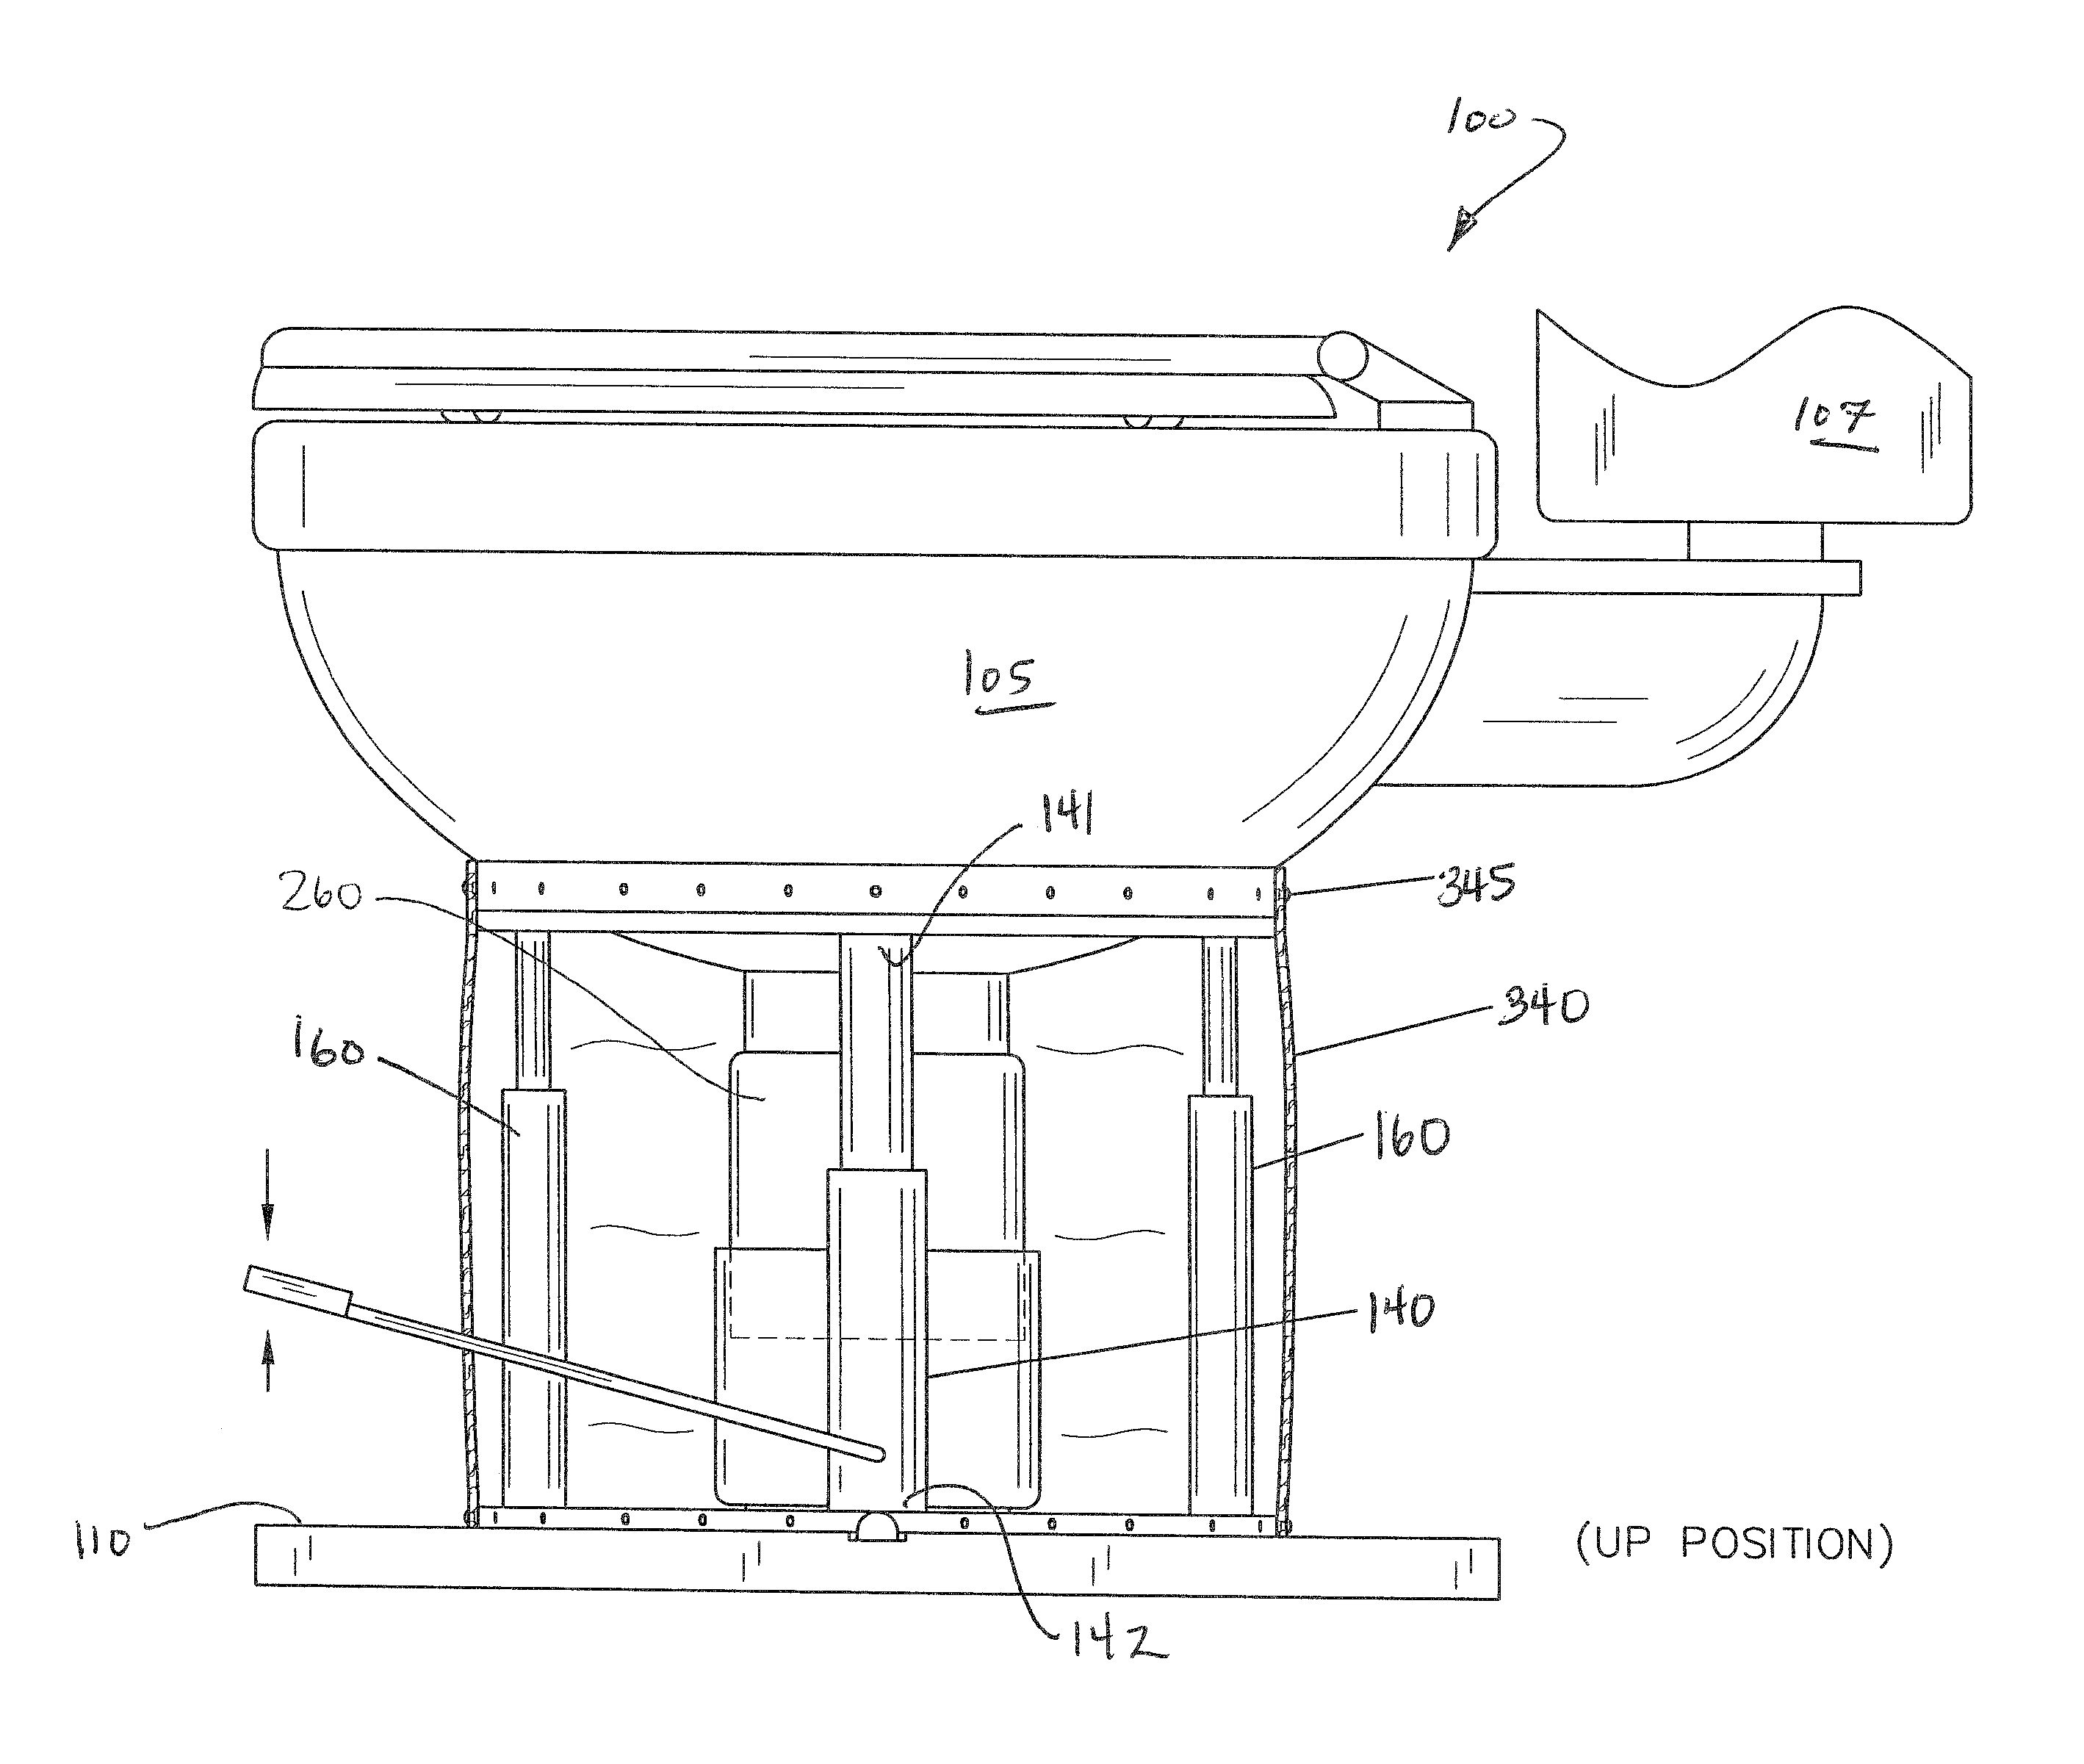 Toilet device with lifting capability